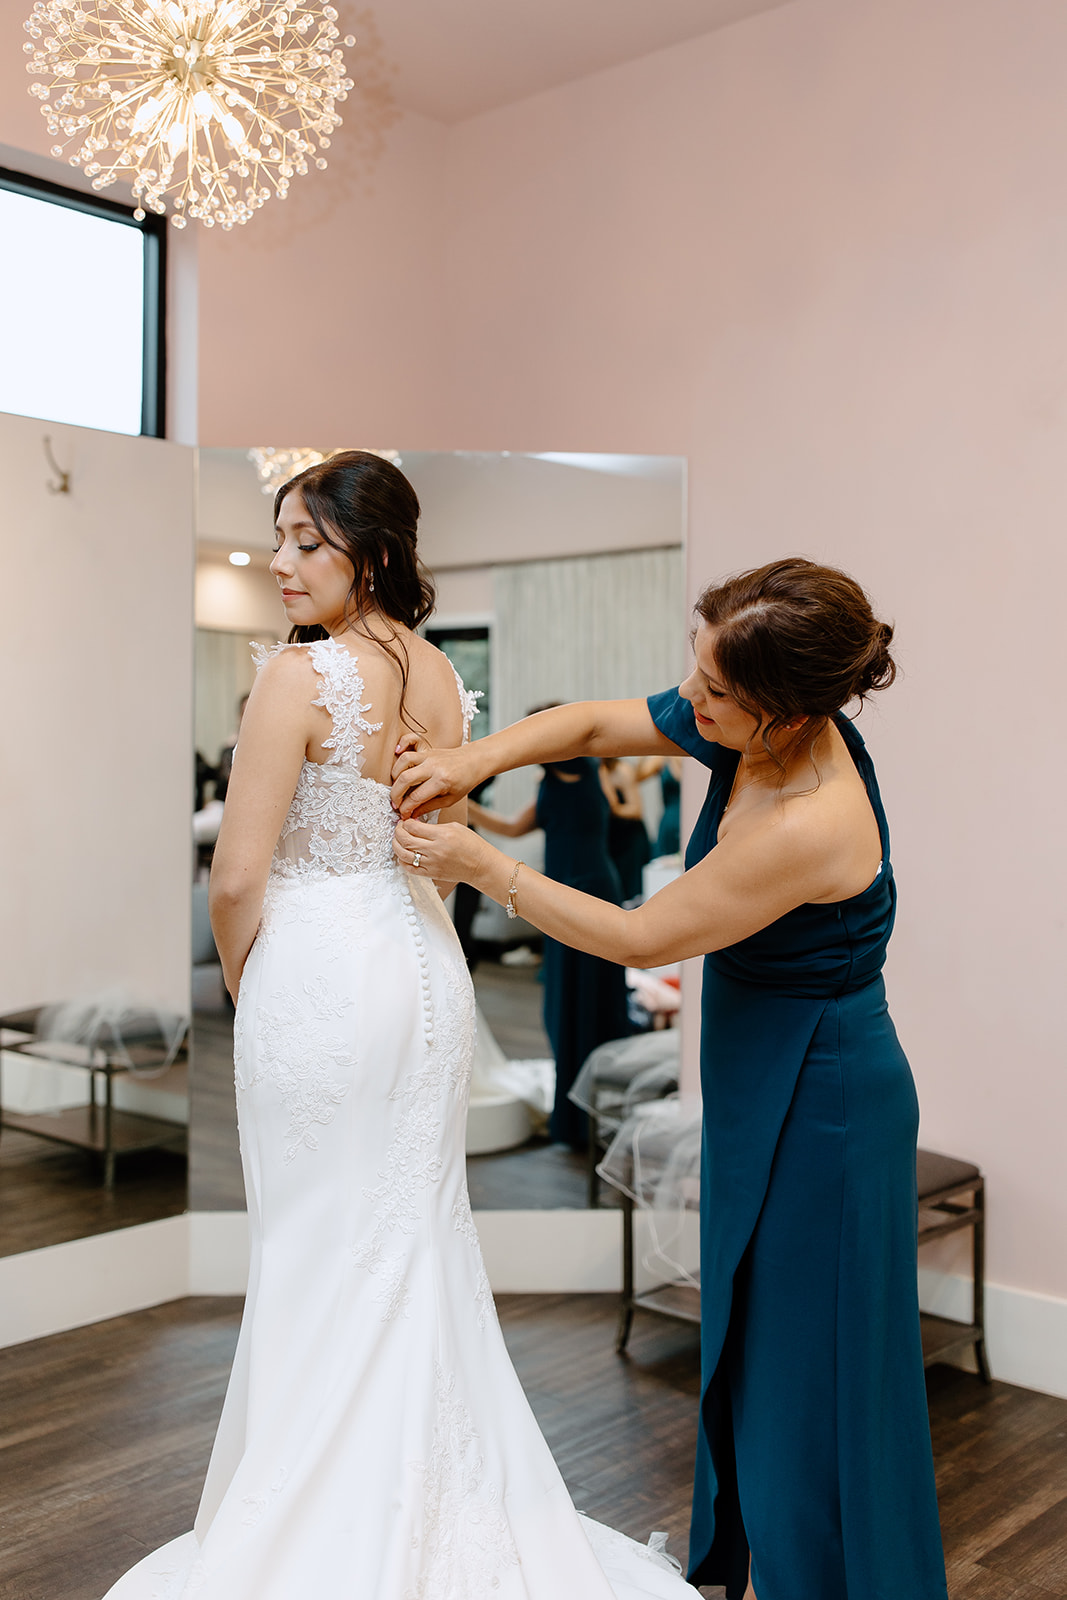 Mother of the bride zipping her daughter's dress